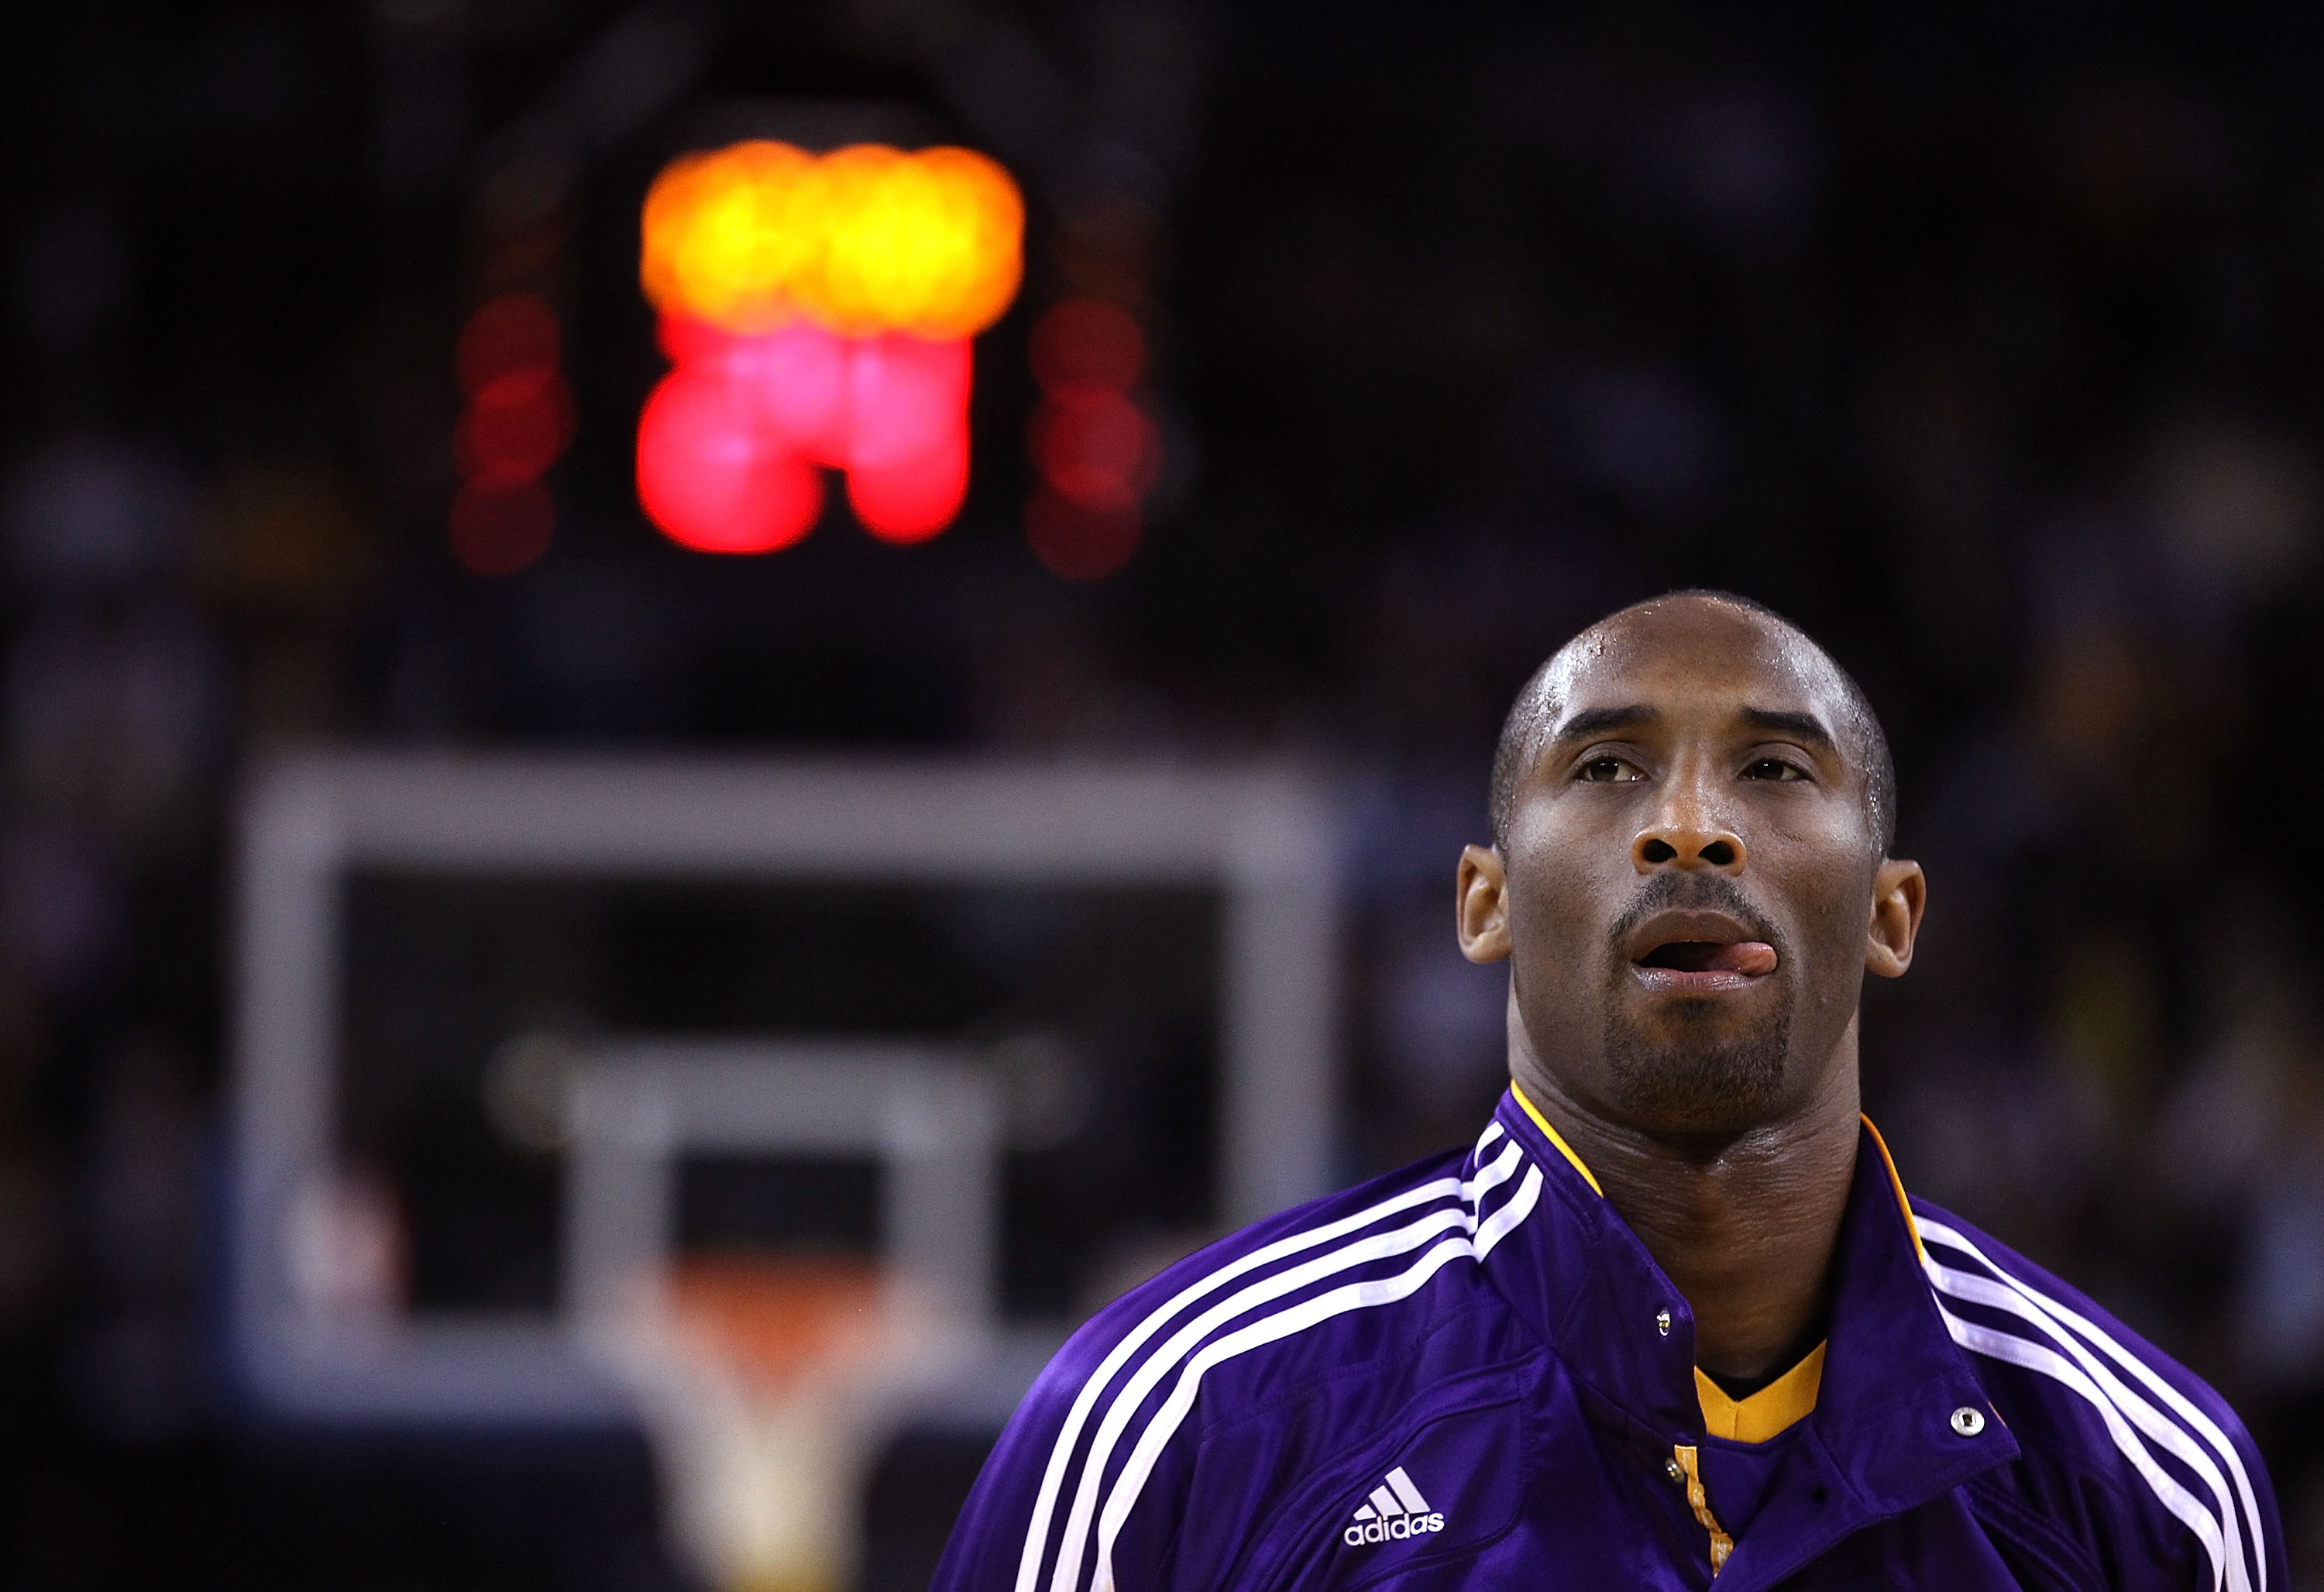 OAKLAND, CA - JANUARY 12: Kobe Bryant #24 of the Los Angeles Lakers stands for the National Anthem before their game against the Golden State Warriors at Oracle Arena on January 12, 2011 in Oakland, California. NOTE TO USER: User expressly acknowledges an